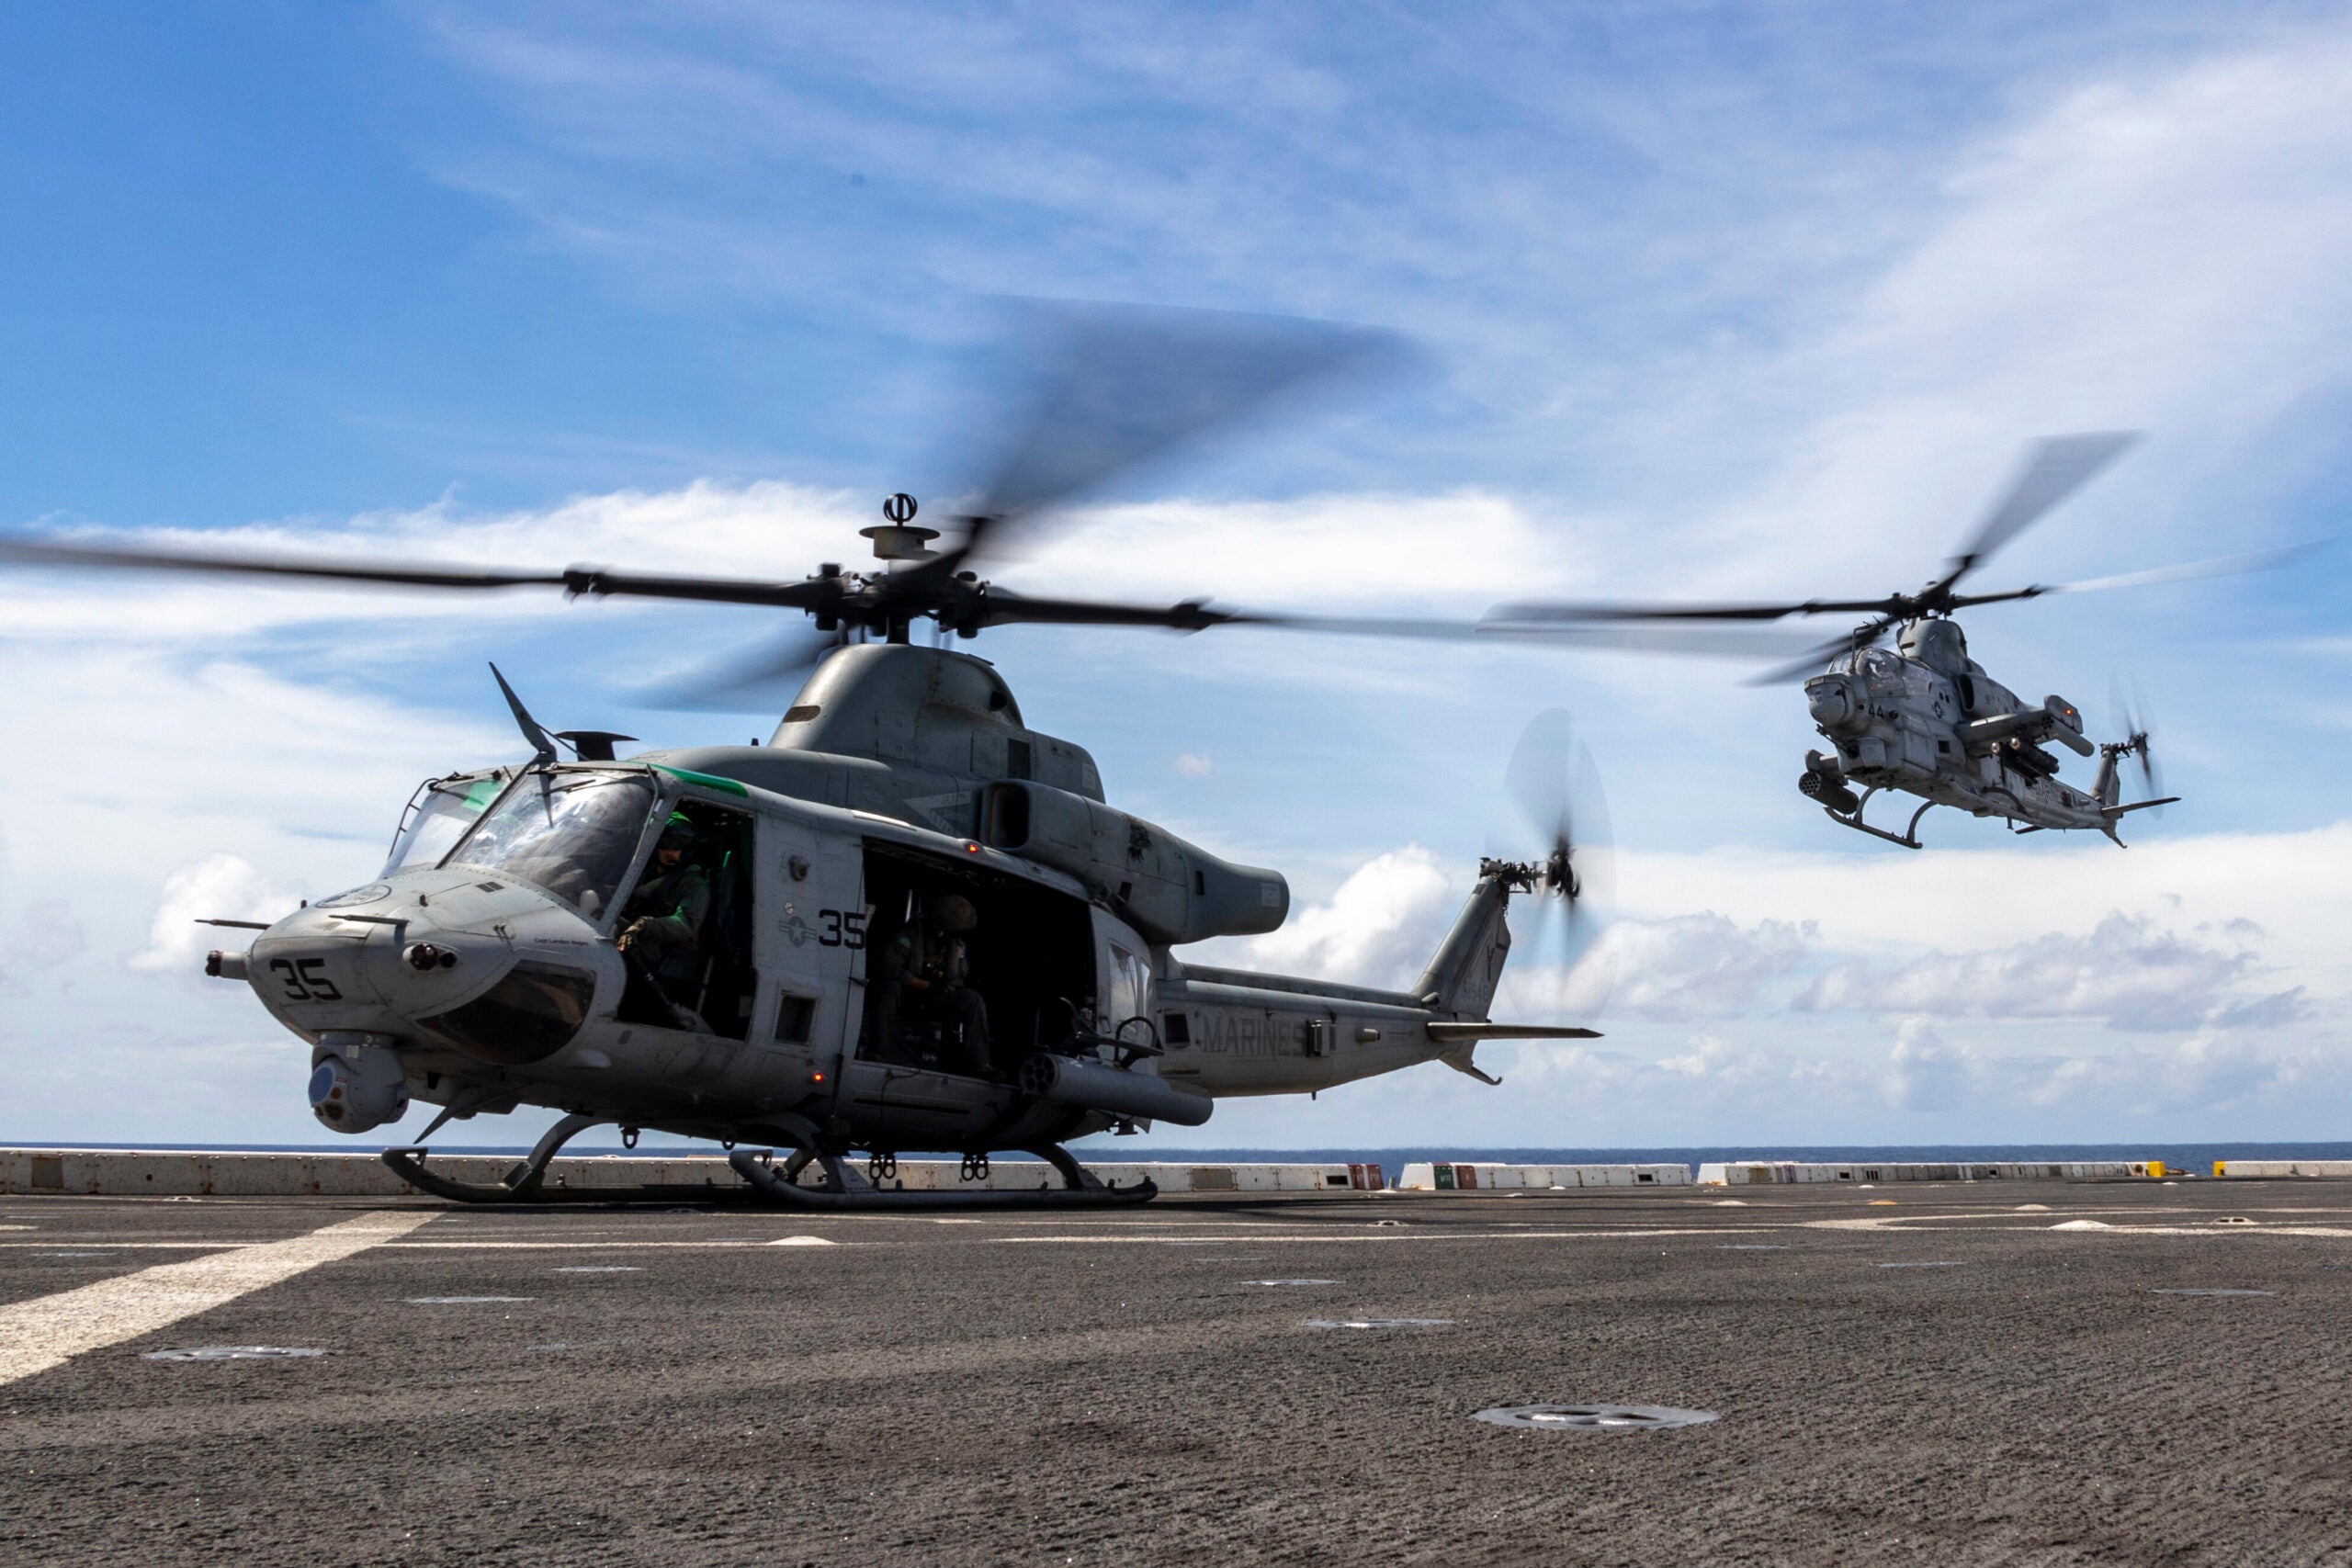 INDIAN OCEAN (Jan. 29, 2023) – U.S. Marine Corps UH-1Y Venom and AH-1Z Viper pilots with Marine Medium Tiltrotor Squadron (VMM) 362 (Rein.), 13th Marine Expeditionary Unit, take off from the amphibious transport dock USS Anchorage (LPD 23) to conduct hoist training, Jan. 29. The 13th MEU is embarked on the Makin Island Amphibious Ready Group, comprised of amphibious assault ship USS Makin Island (LHD 8) and amphibious transport dock ships USS John P. Murtha (LPD 26) and the Anchorage, and operating in the U.S. 7th Fleet area of operations. 7th Fleet is the U.S. Navy’s largest forward-deployed numbered fleet, and routinely interacts and operates with Allies and partners in preserving a free and open Indo-Pacific region. (U.S. Marine Corps photo by Cpl. Austin Gillam)